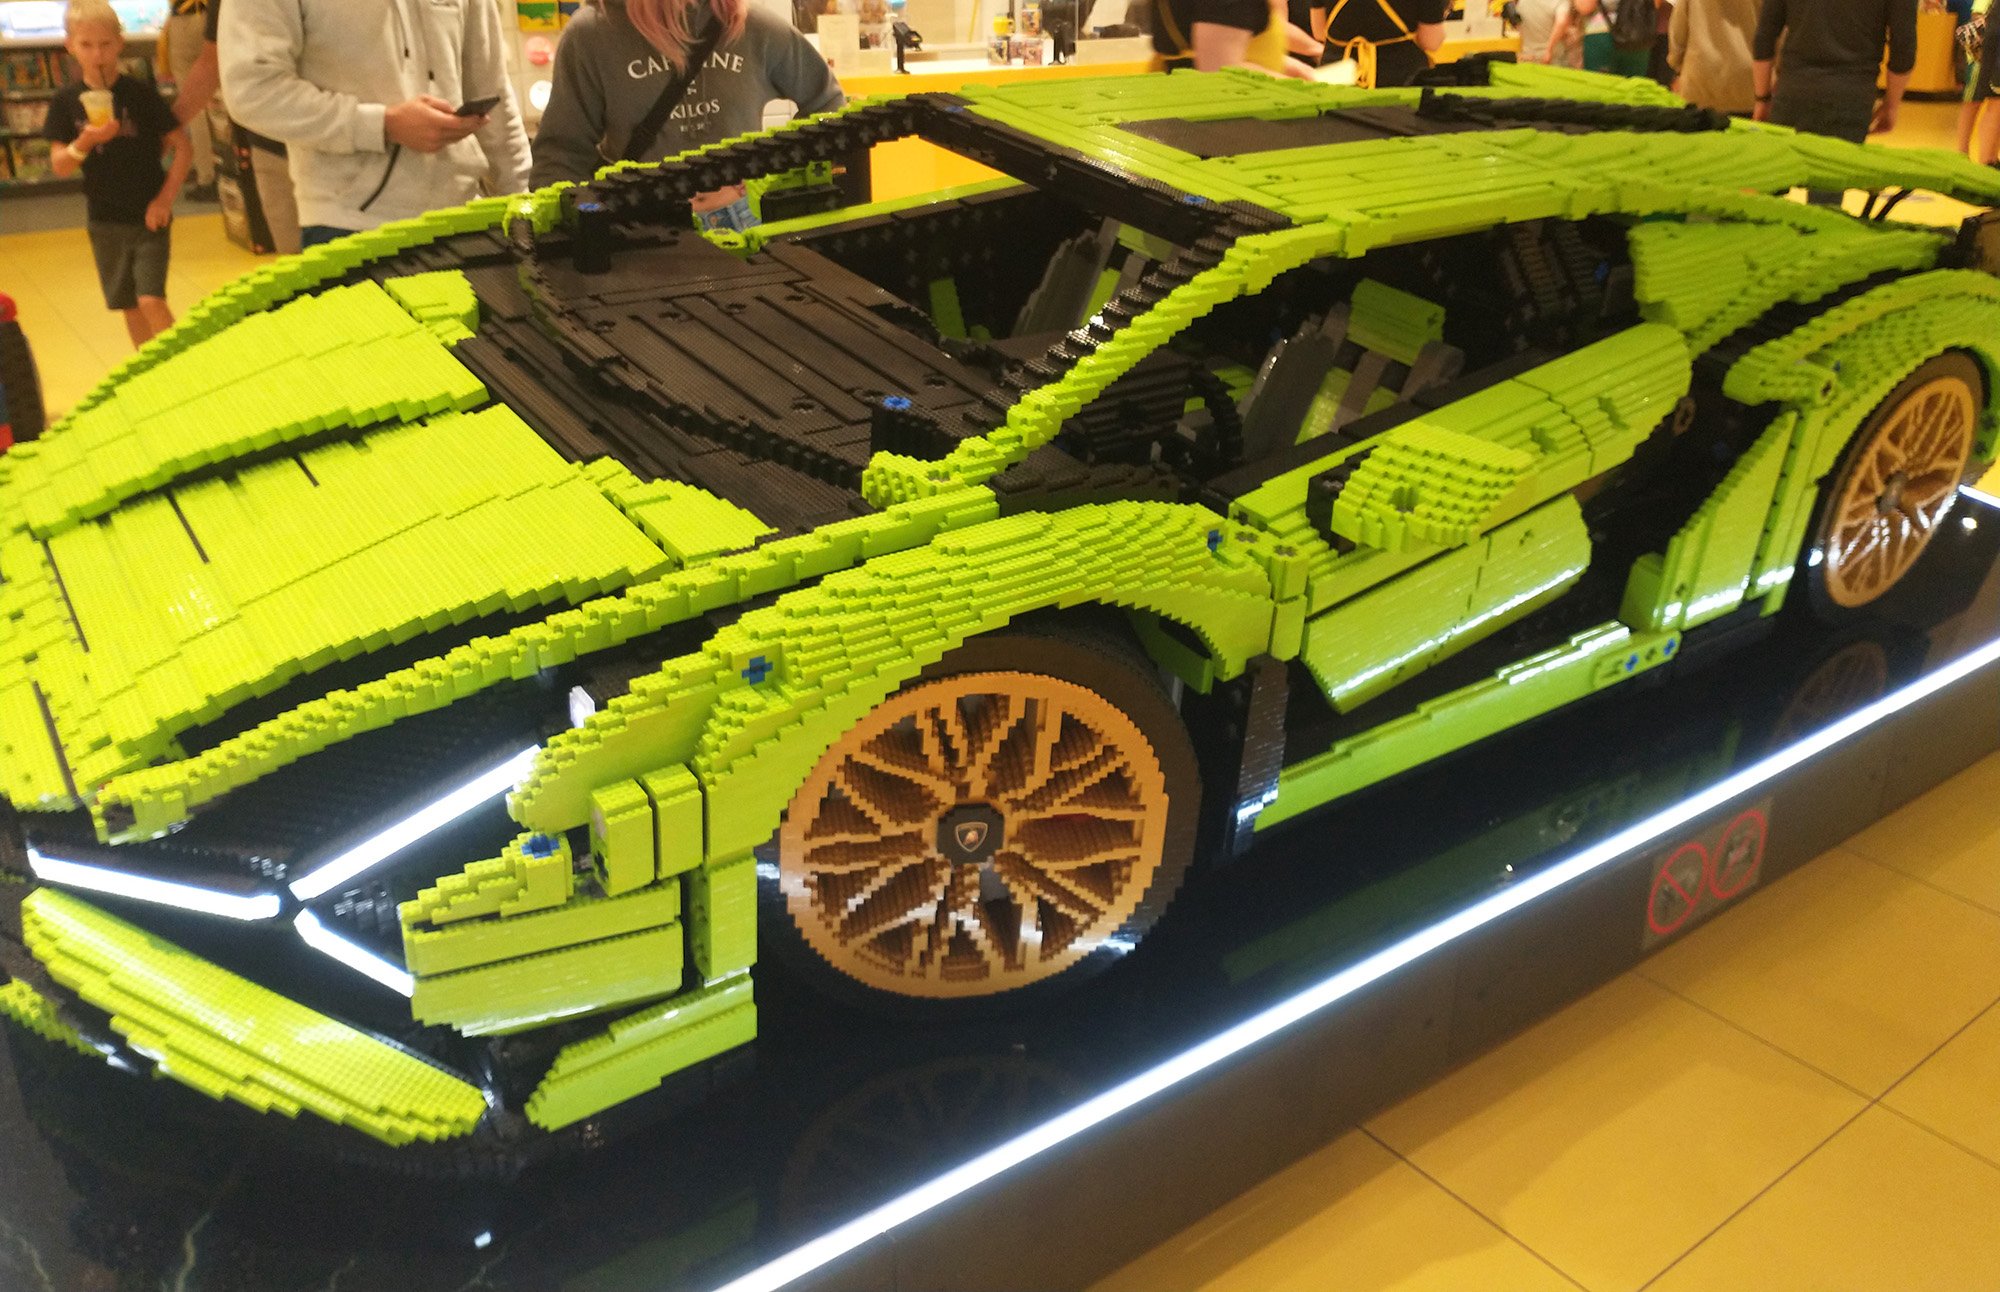 Even a life-sized version of their Lego lambo model.